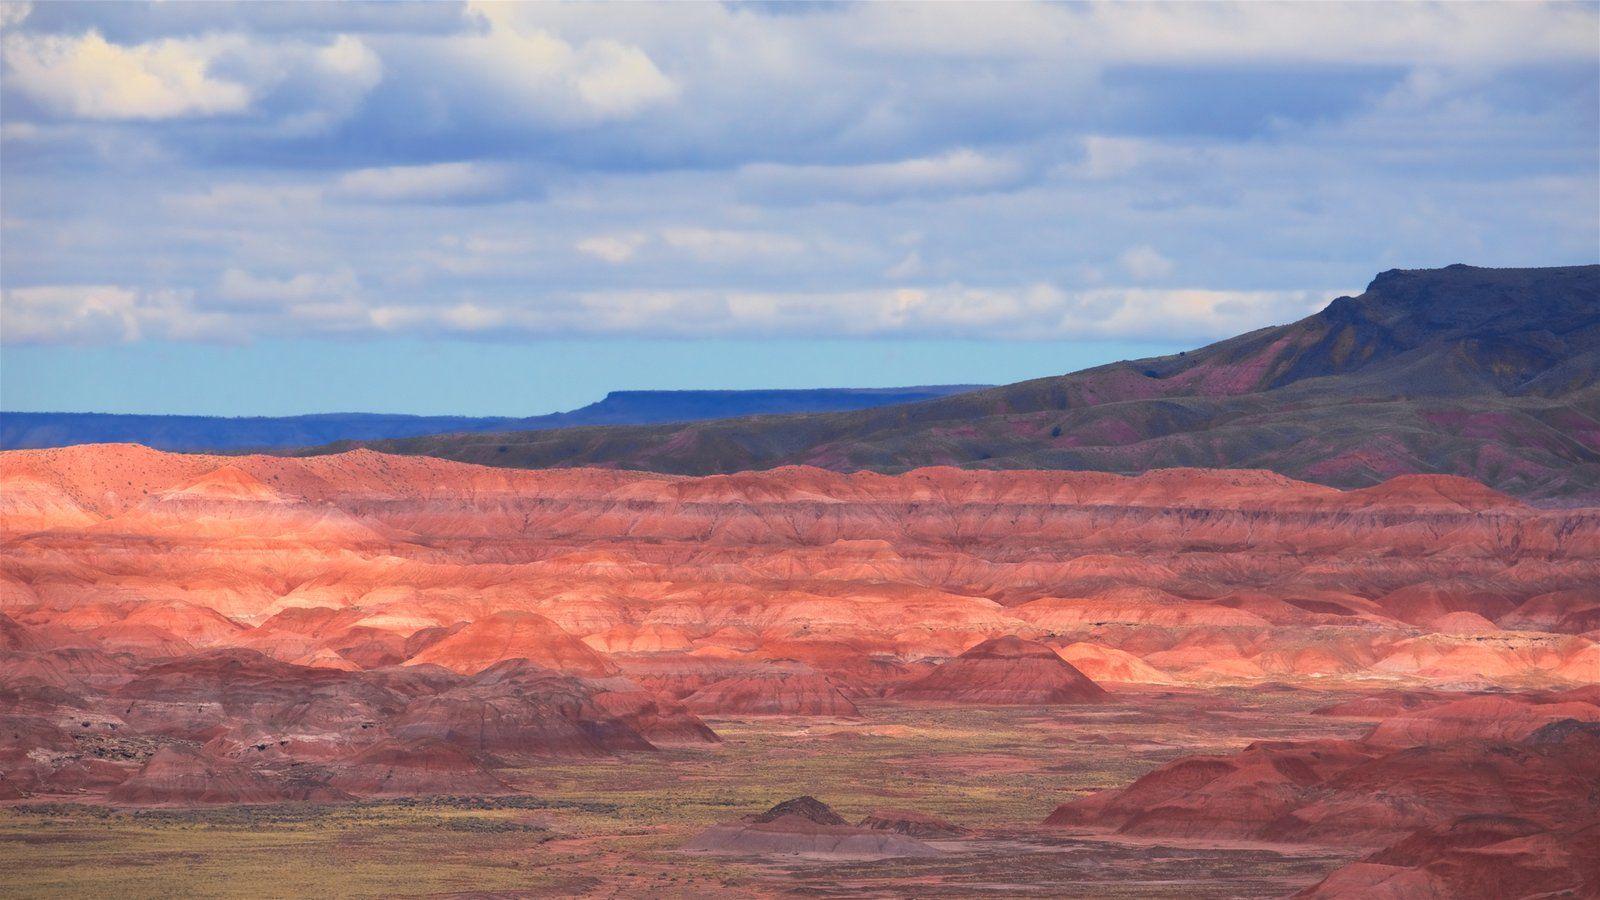 Landscape Pictures View Wallpaper of Petrified Forest National Park